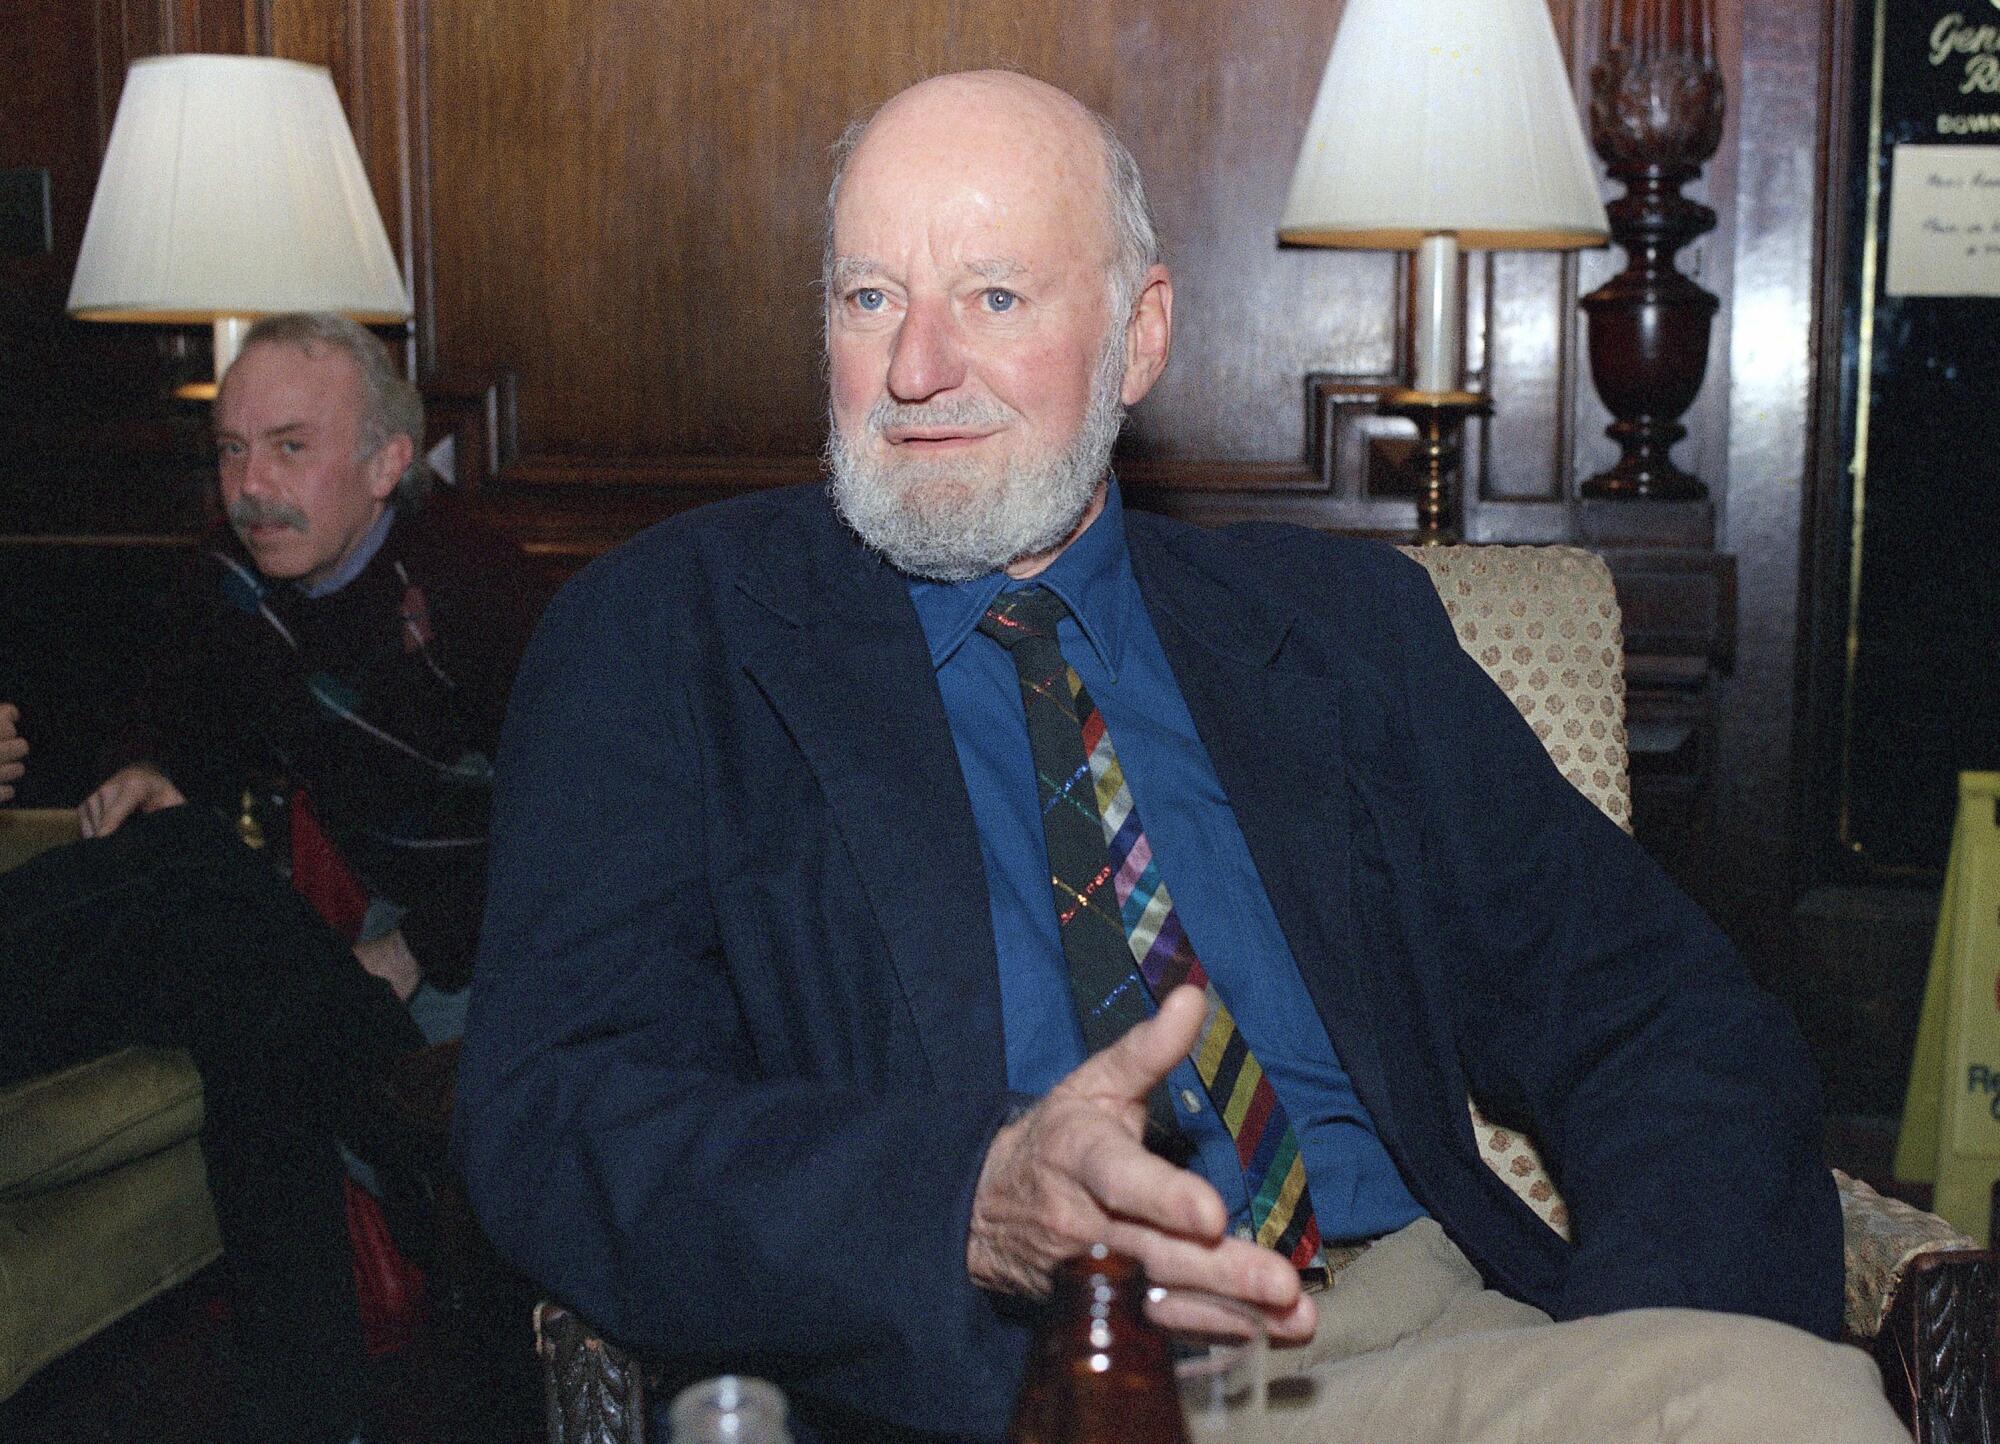 A man with a full beard in a blue jacket, striped tie and khaki pants, seated.